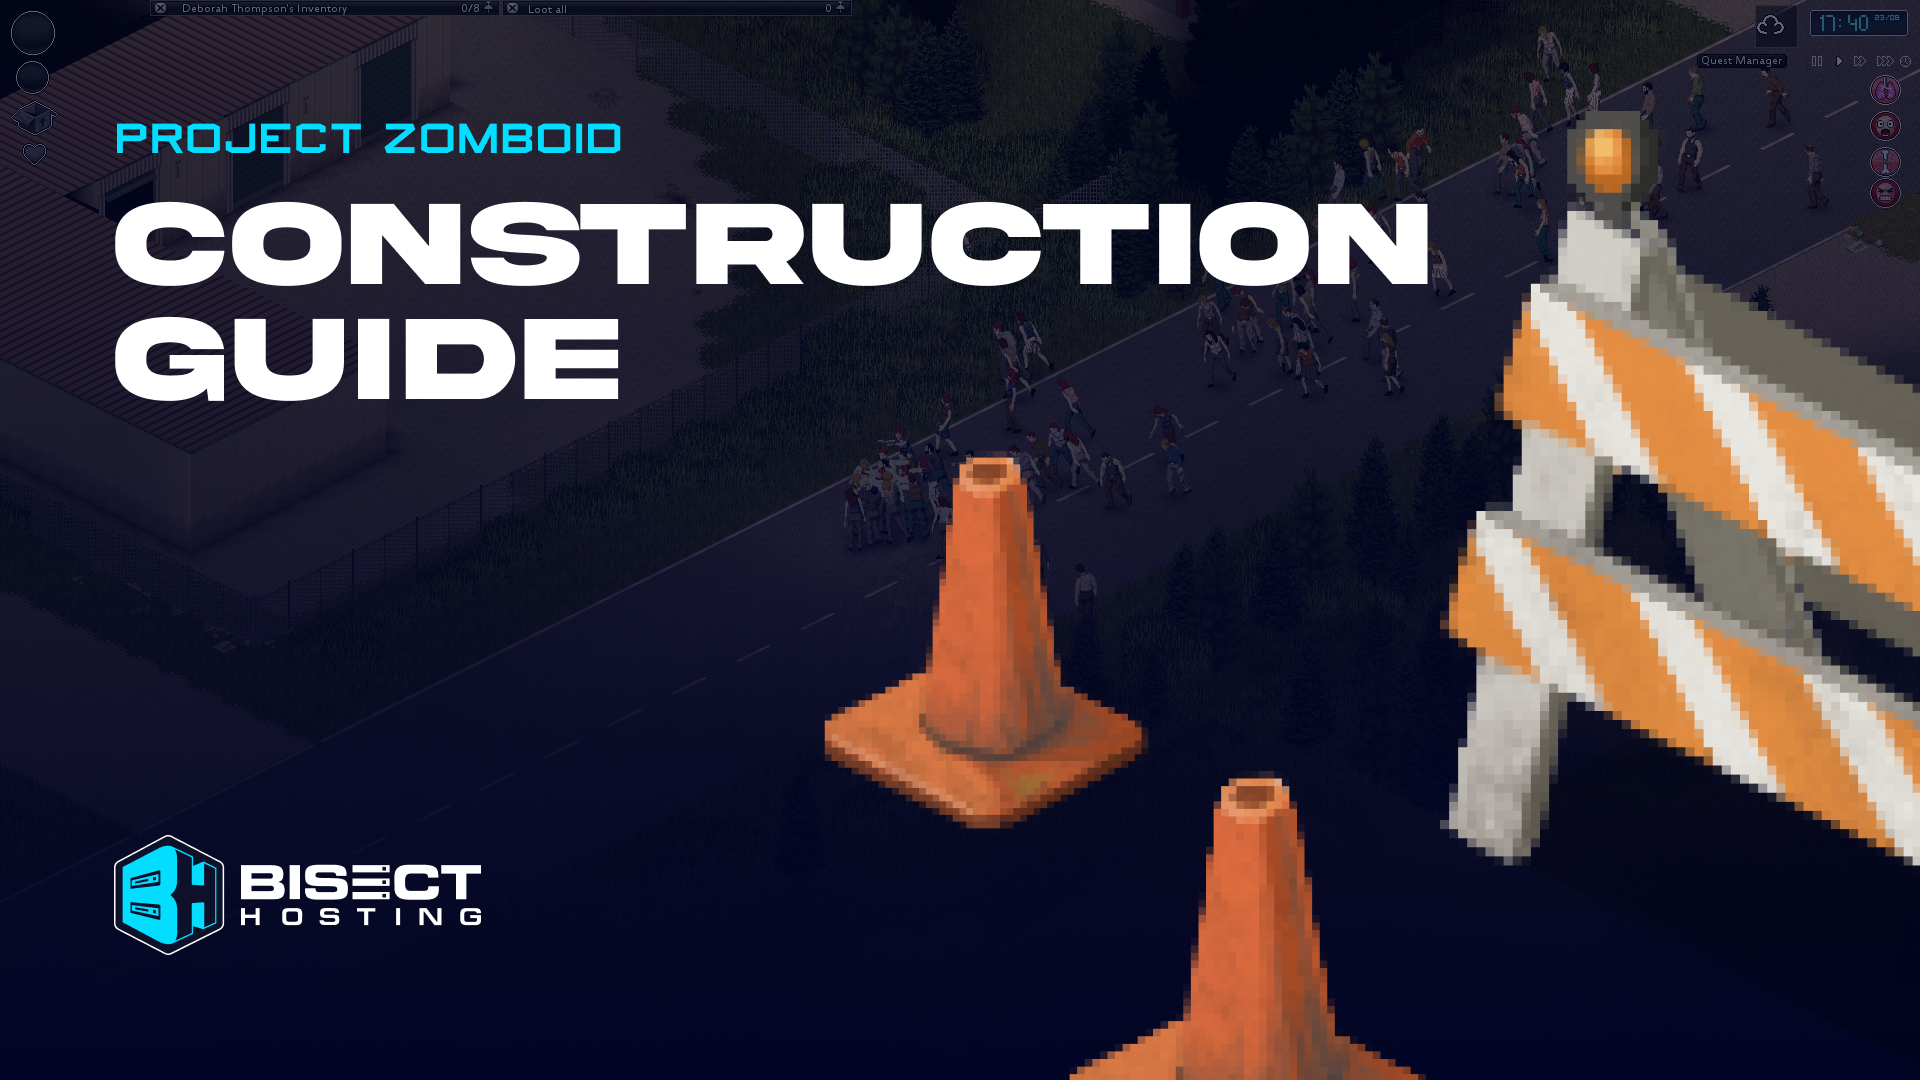 Project Zomboid Carpentry Guide: Best Ways To Level, Tools, Skill Books, & More